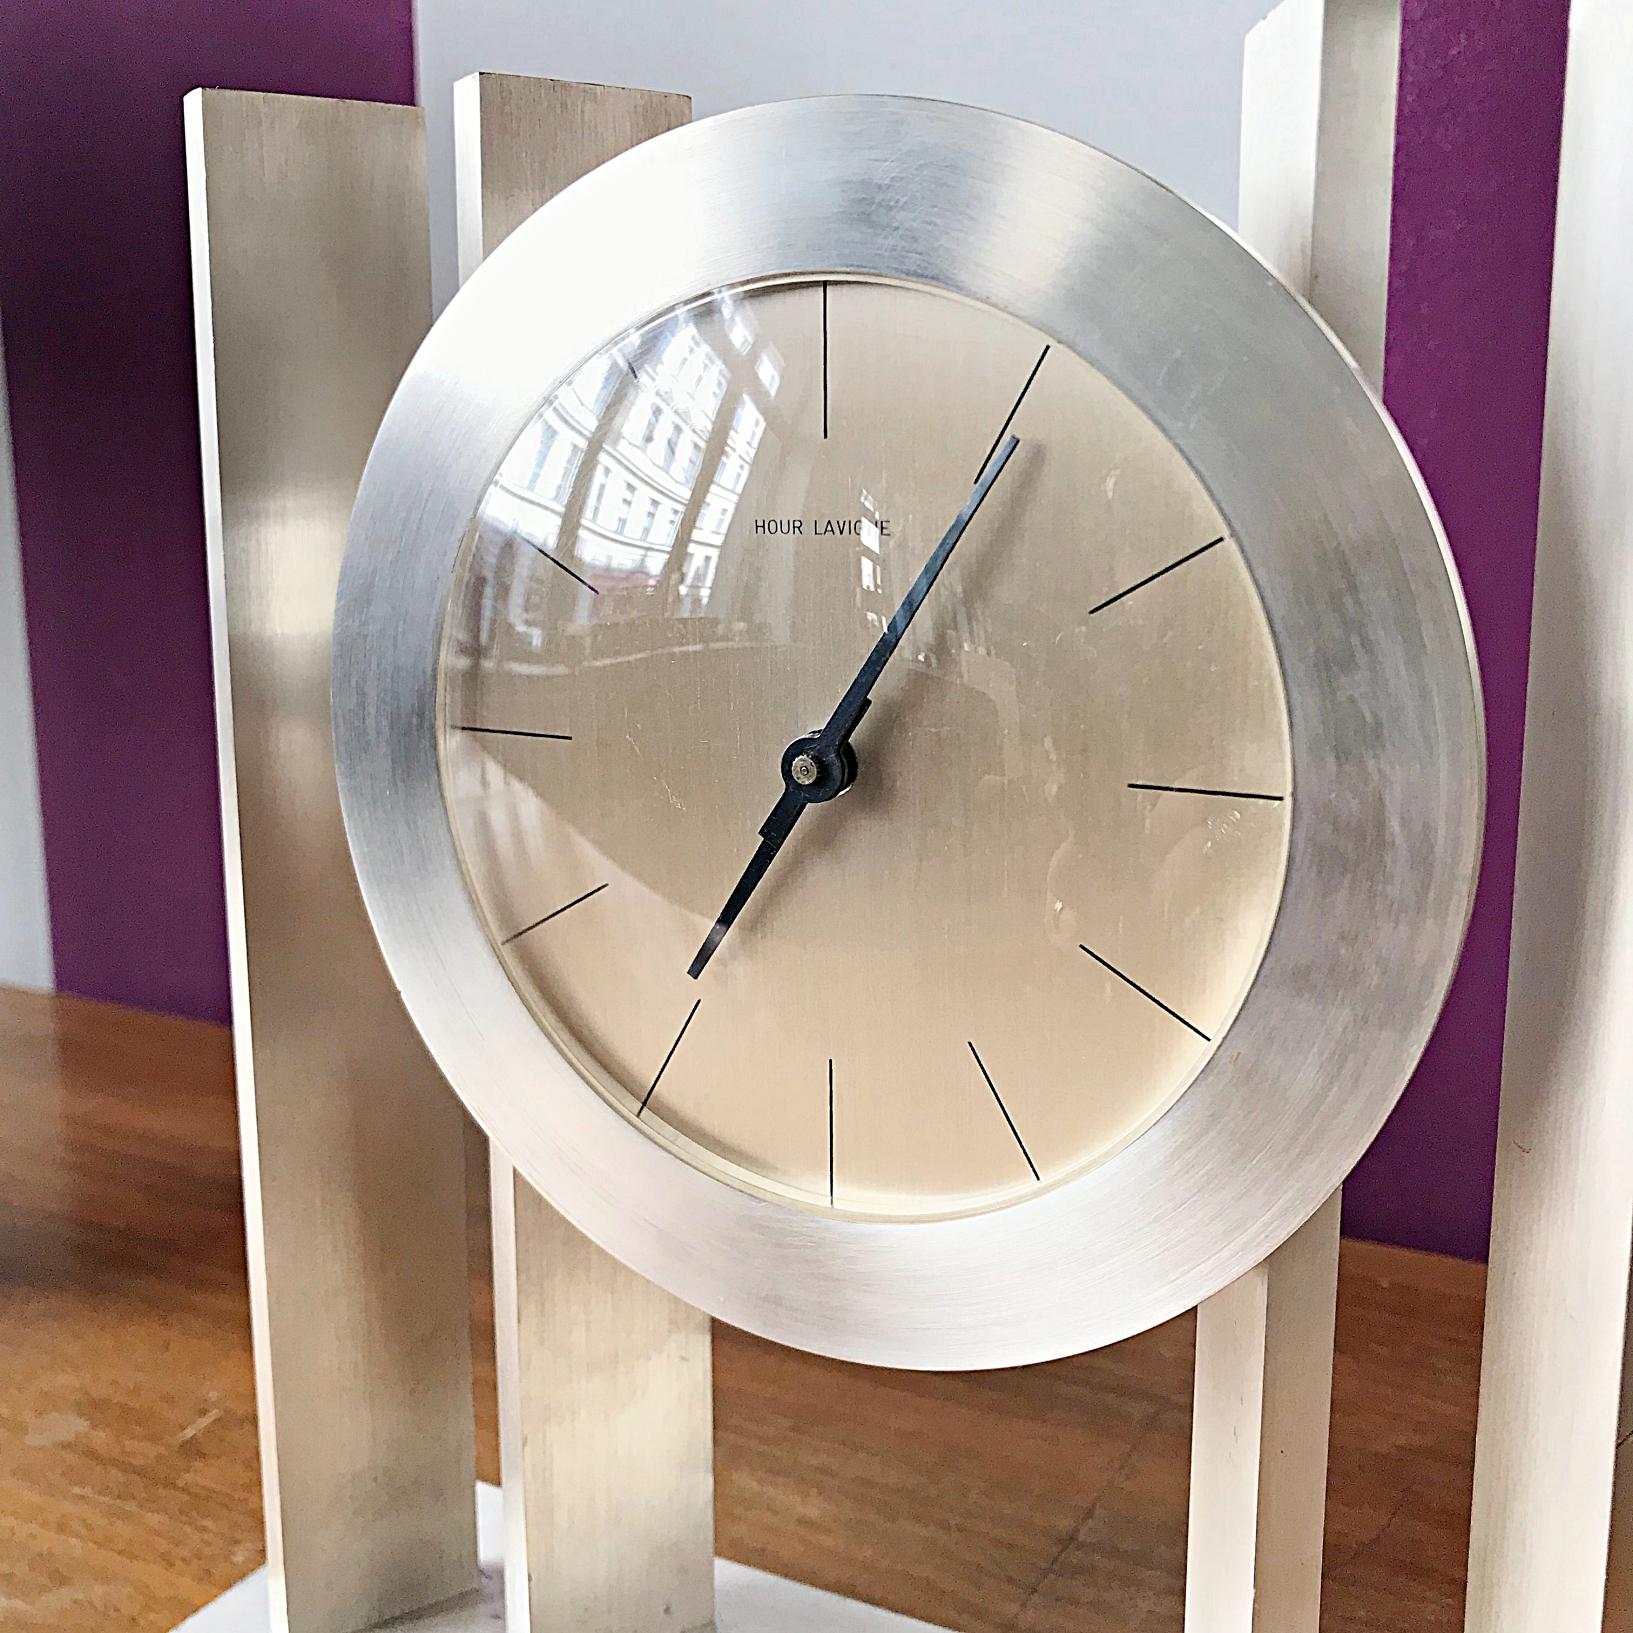 Exclusiv French Hour Lavigne Silvered Automatic Table Clock, 1960s, France In Good Condition For Sale In Biebergemund, Hessen